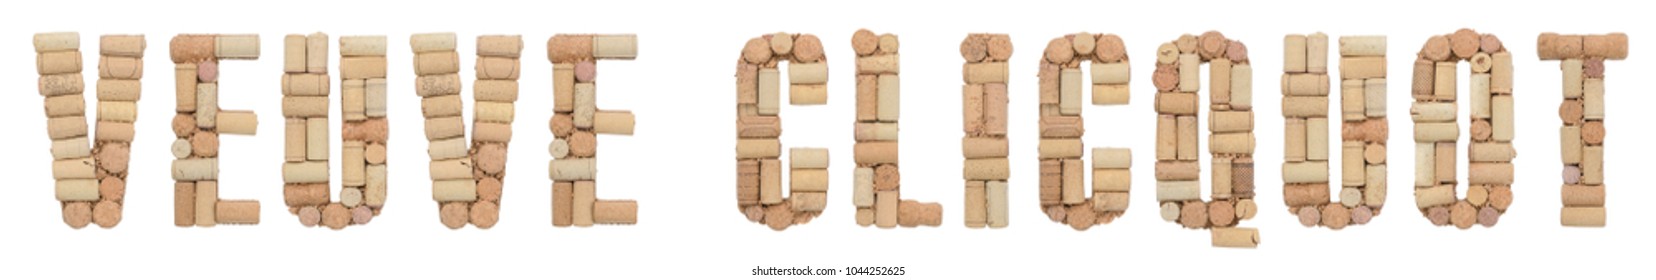 Veuve Clicquot made of wine corks Isolated on white background